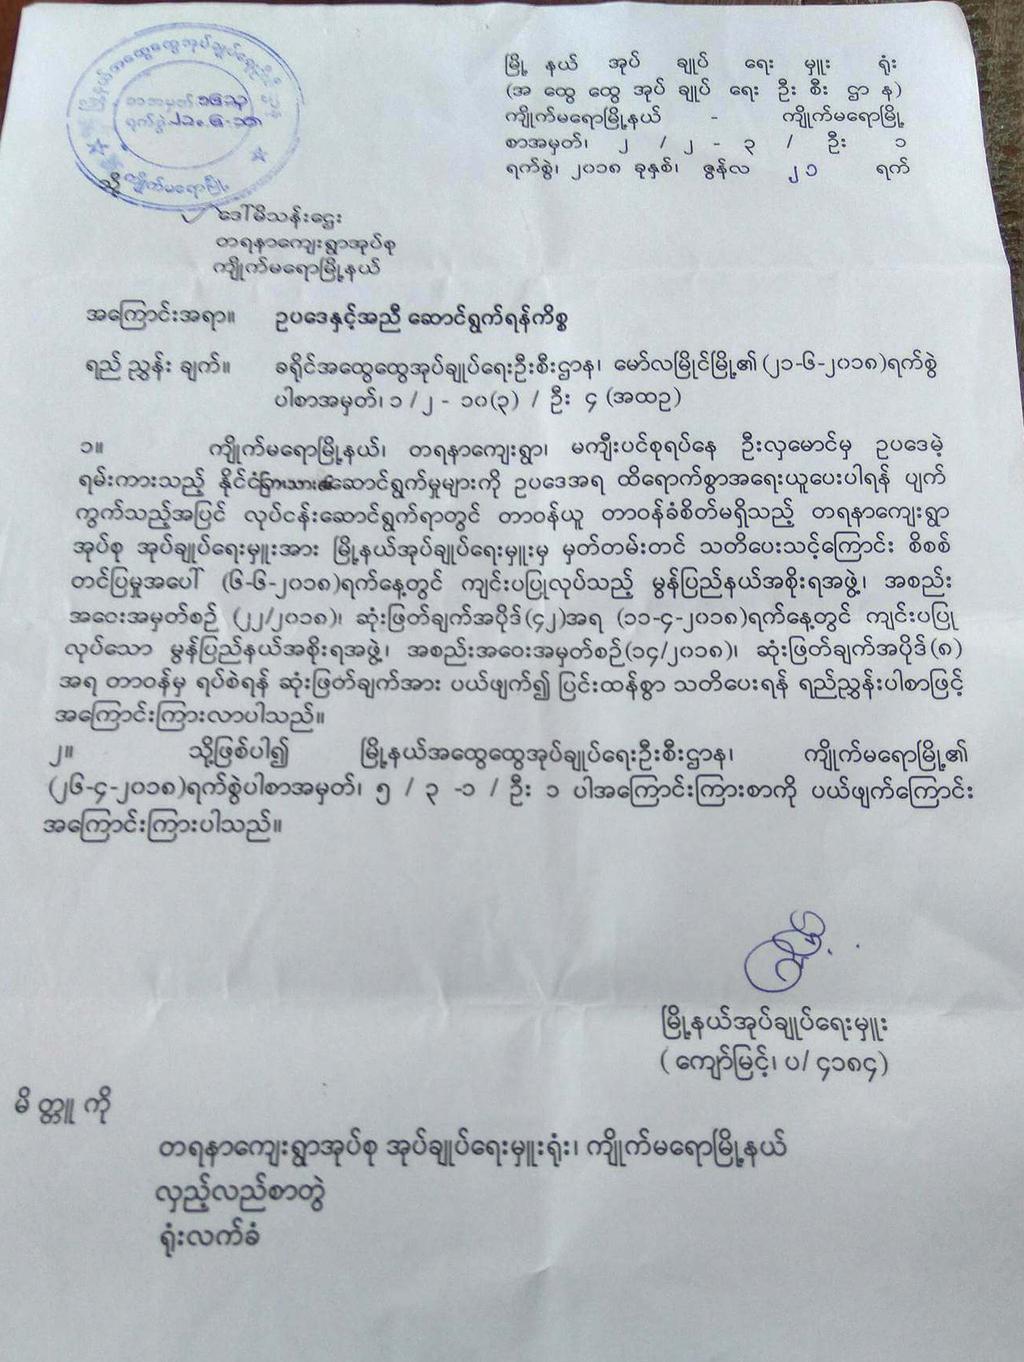 June 26, 2018 HURFOM: On June 21 st 2018, the Mon State government declared that they had reversed their decision to dismiss Mi Than Htay, also known as Mi Jaloon Htaw, of Taranar village, Kyaikmayaw